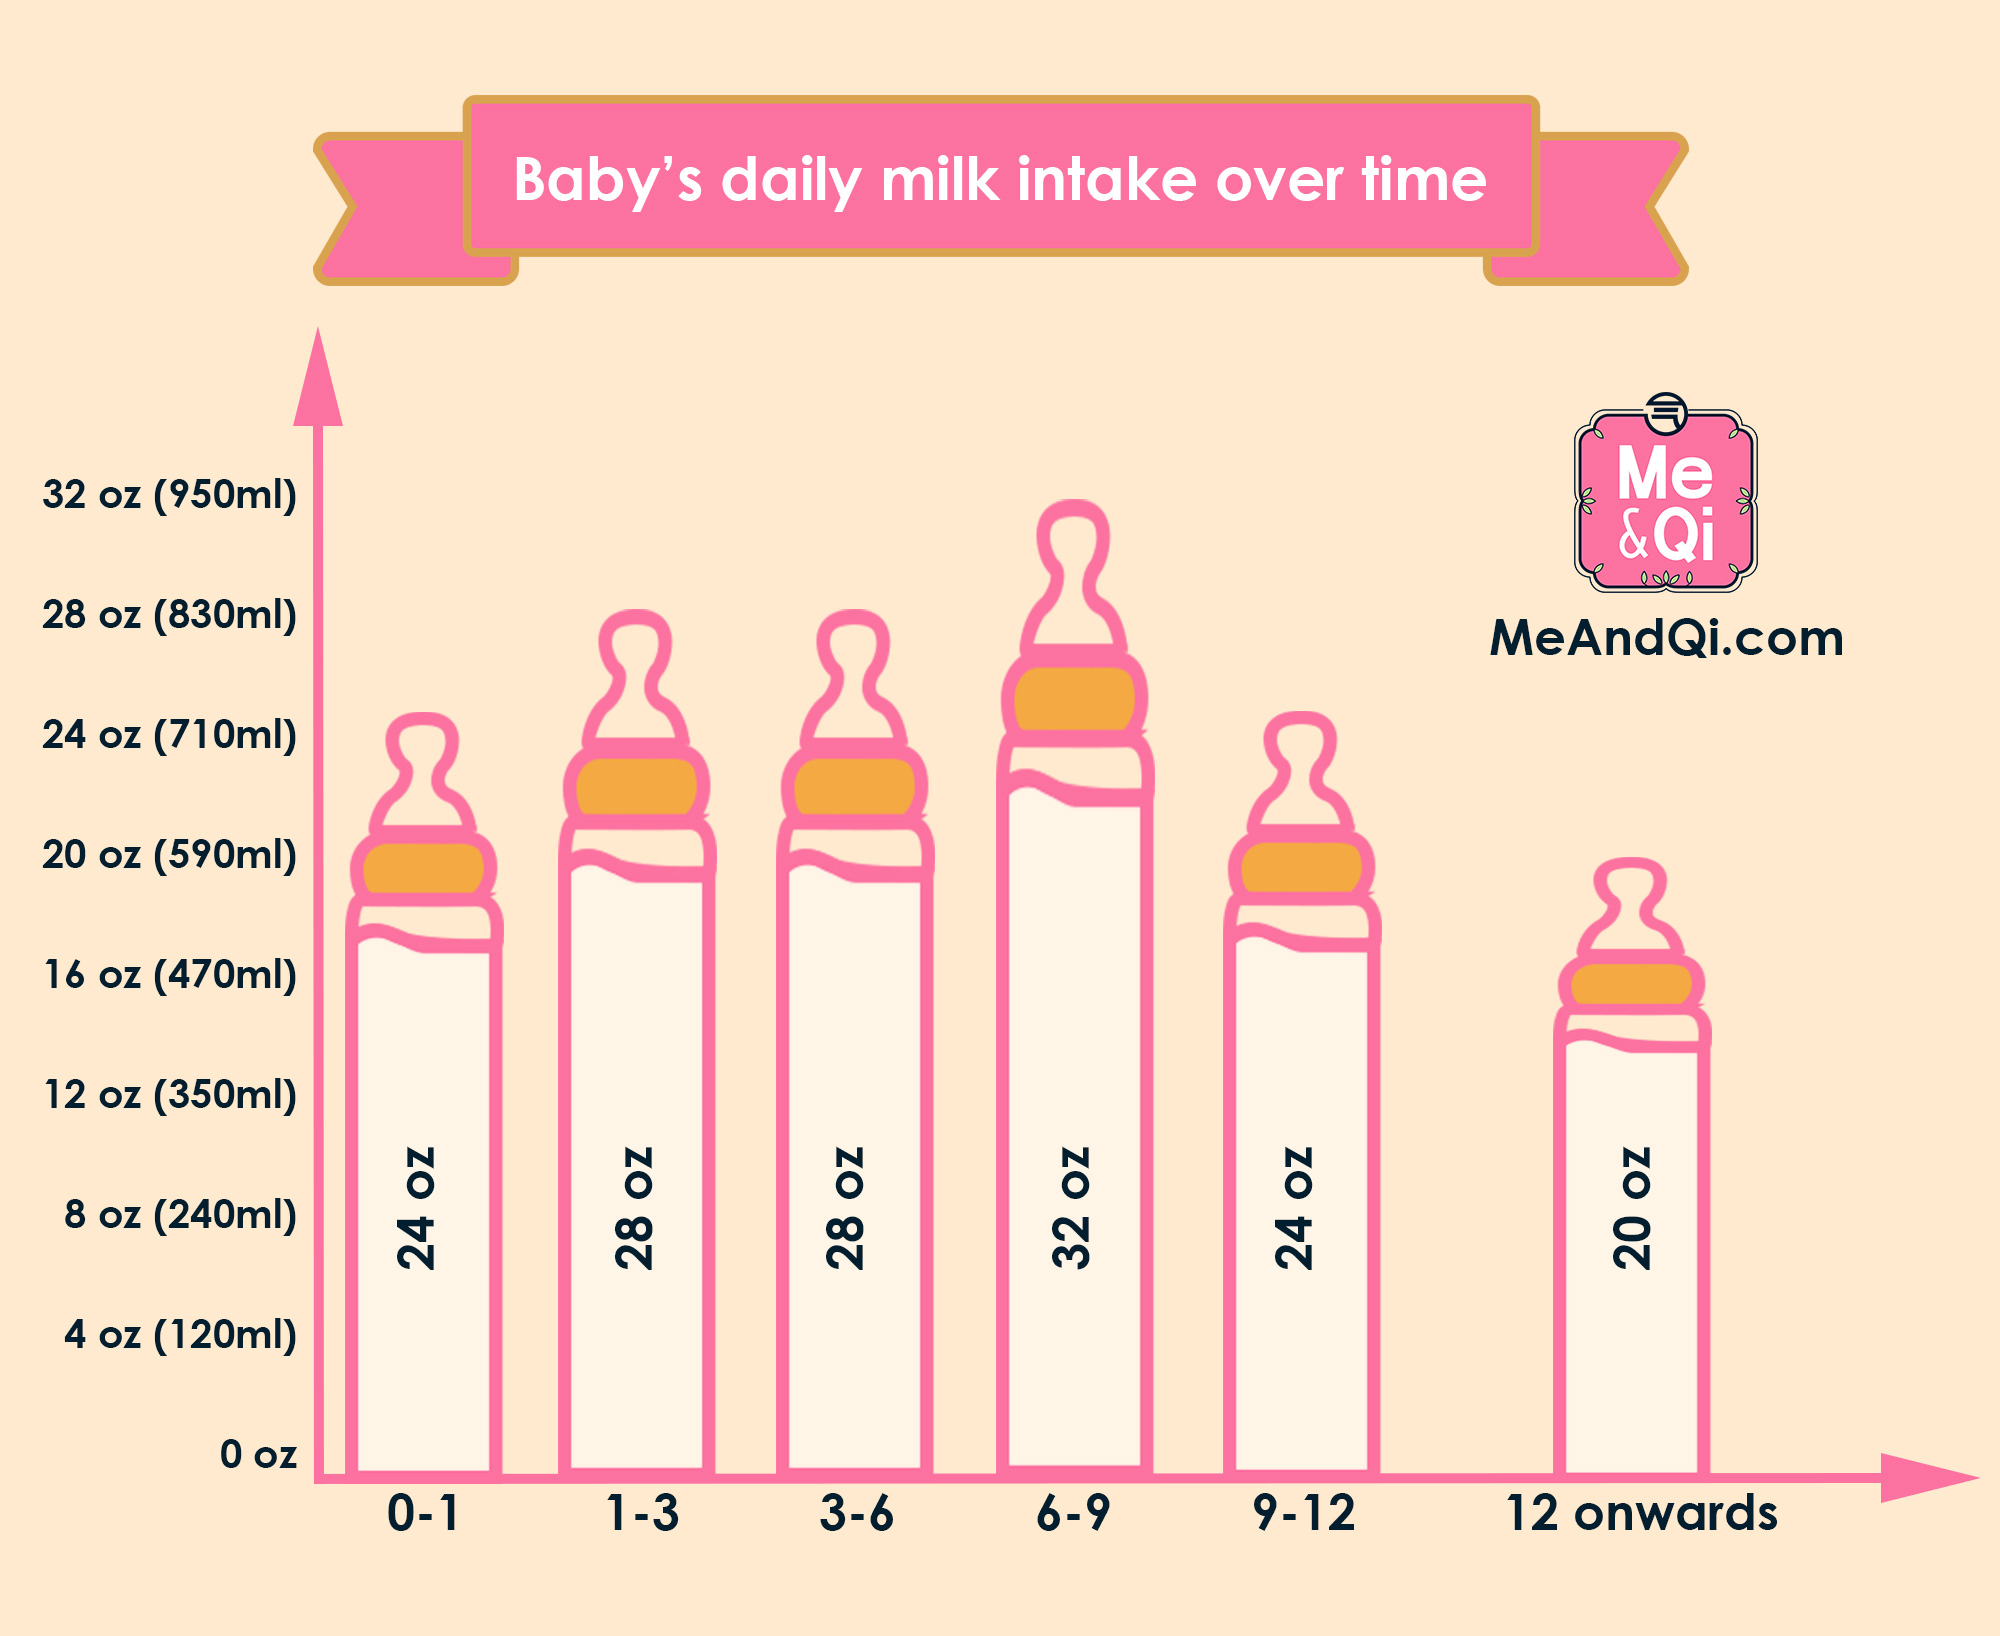 Baby's daily milk intake over time